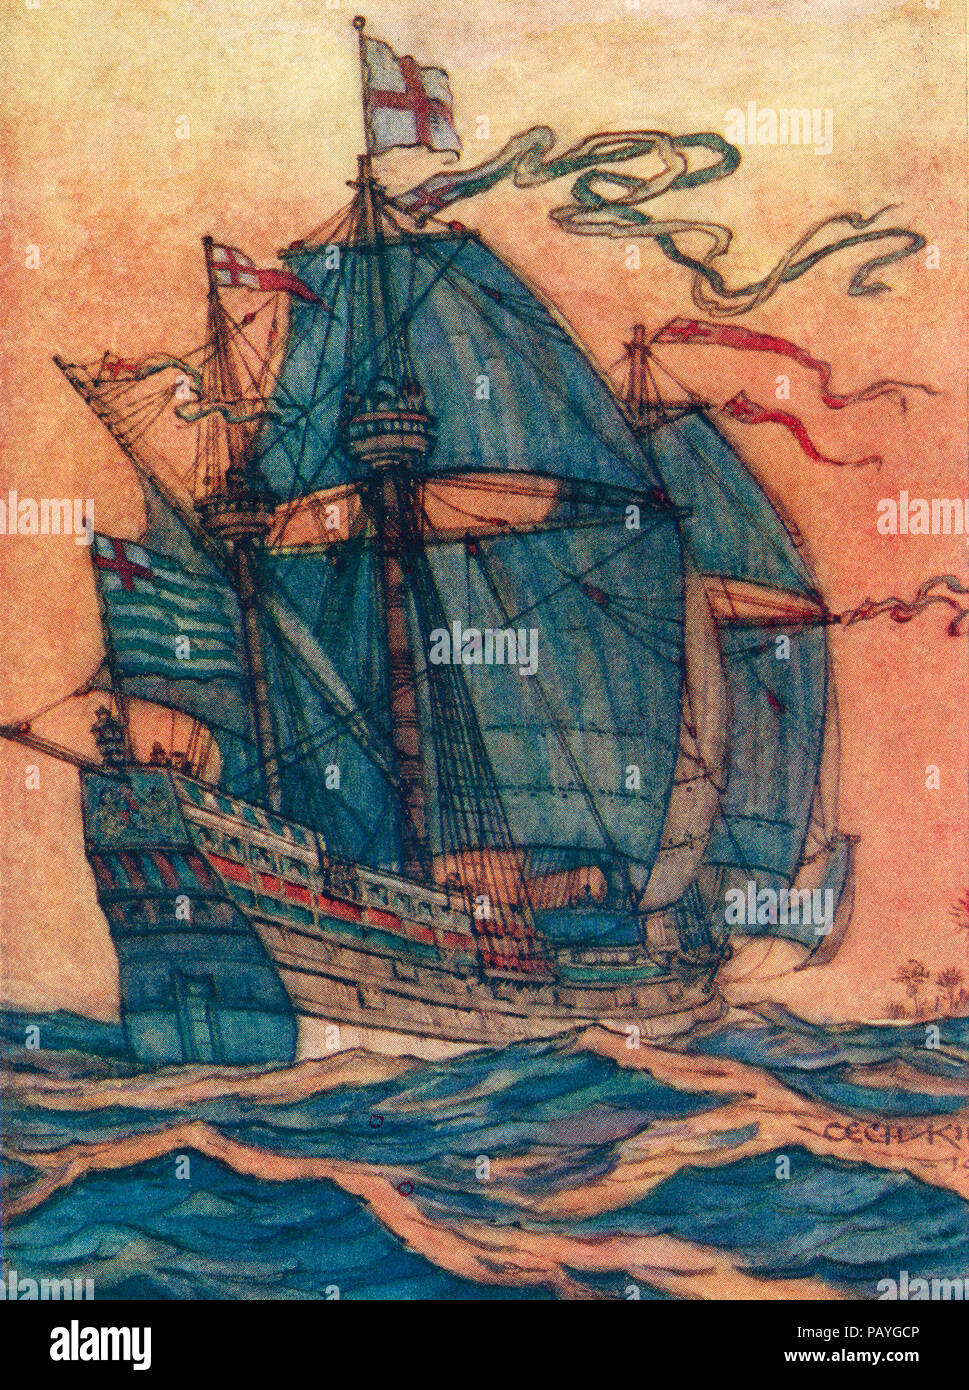 Sir Francis Drake's ship The Golden Hind.  From The Book of Ships, published c.1920. Stock Photo